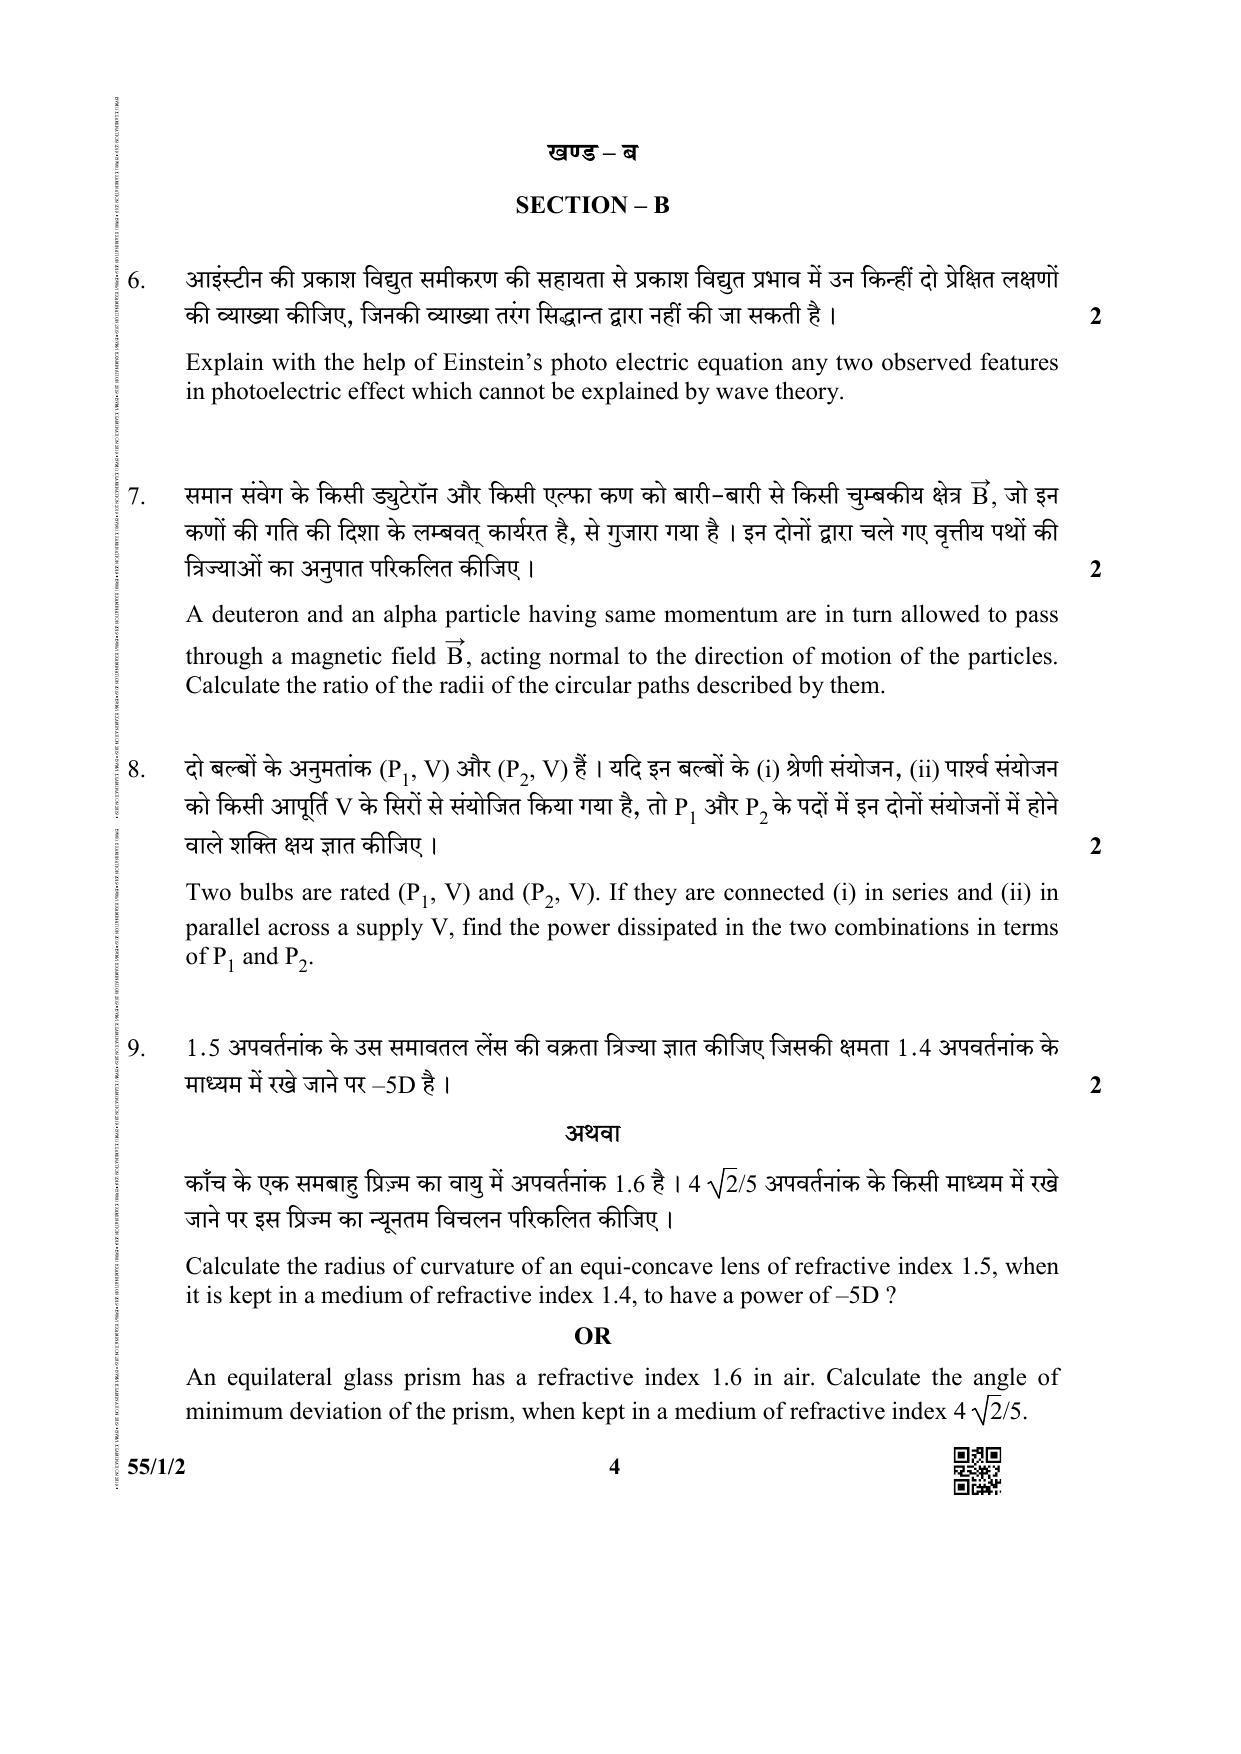 CBSE Class 12 55-1-2 (Physics) 2019 Question Paper - Page 4